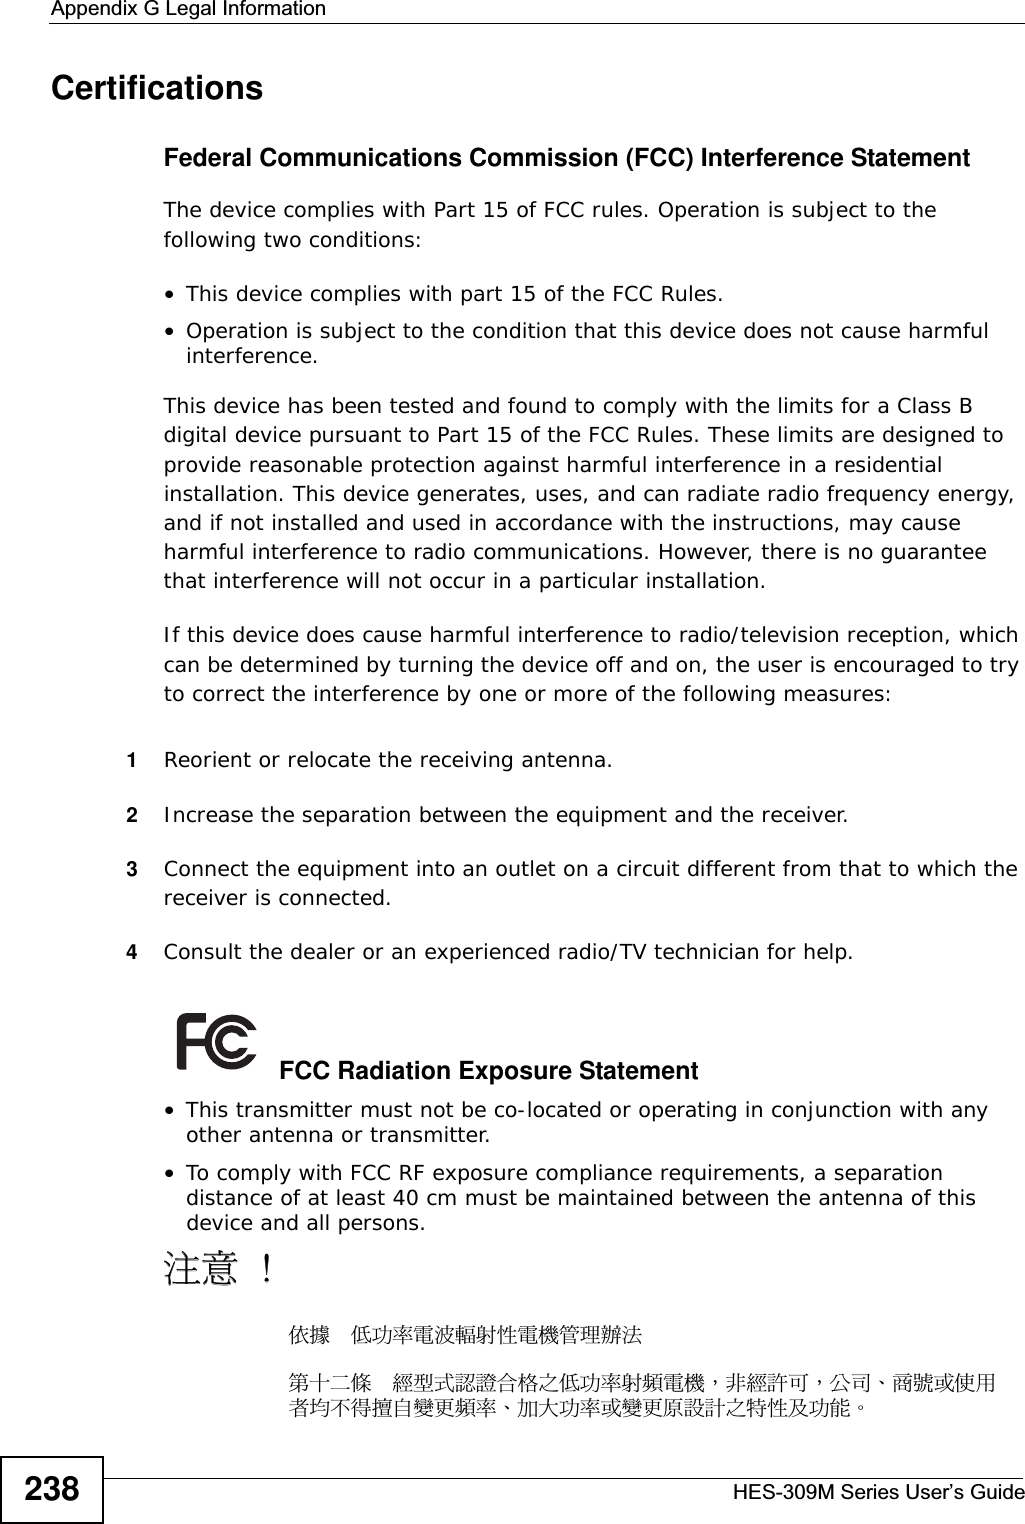 Appendix G Legal InformationHES-309M Series User’s Guide238CertificationsFederal Communications Commission (FCC) Interference StatementThe device complies with Part 15 of FCC rules. Operation is subject to thefollowing two conditions:This device complies with part 15 of the FCC Rules.Operation is subject to the condition that this device does not cause harmfulinterference.This device has been tested and found to comply with the limits for a Class Bdigital device pursuant to Part 15 of the FCC Rules. These limits are designed toprovide reasonable protection against harmful interference in a residentialinstallation. This device generates, uses, and can radiate radio frequency energy,and if not installed and used in accordance with the instructions, may causeharmful interference to radio communications. However, there is no guaranteethat interference will not occur in a particular installation.If this device does cause harmful interference to radio/television reception, whichcan be determined by turning the device off and on, the user is encouraged to tryto correct the interference by one or more of the following measures:1Reorient or relocate the receiving antenna.2Increase the separation between the equipment and the receiver.3Connect the equipment into an outlet on a circuit different from that to which thereceiver is connected.4Consult the dealer or an experienced radio/TV technician for help.FCC Radiation Exposure StatementThis transmitter must not be co-located or operating in conjunction with anyother antenna or transmitter.To comply with FCC RF exposure compliance requirements, a separationdistance of at least 40 cm must be maintained between the antenna of thisdevice and all persons.ࣹრ !ࠉᖕ !܅פ෷ሽंᘿ୴ࢤሽᖲጥ෻ᙄऄรԼԲය ᆖীڤᎁᢞٽ௑հ܅פ෷୴᙮ሽᖲΔॺᆖ๺ױΔֆ׹Ε೸ᇆࢨࠌشृ݁լ൓ᖐ۞᧢ޓ᙮෷ΕףՕפ෷ࢨ᧢ޓ଺๻ૠհ௽ࢤ֗פ౨Ζ